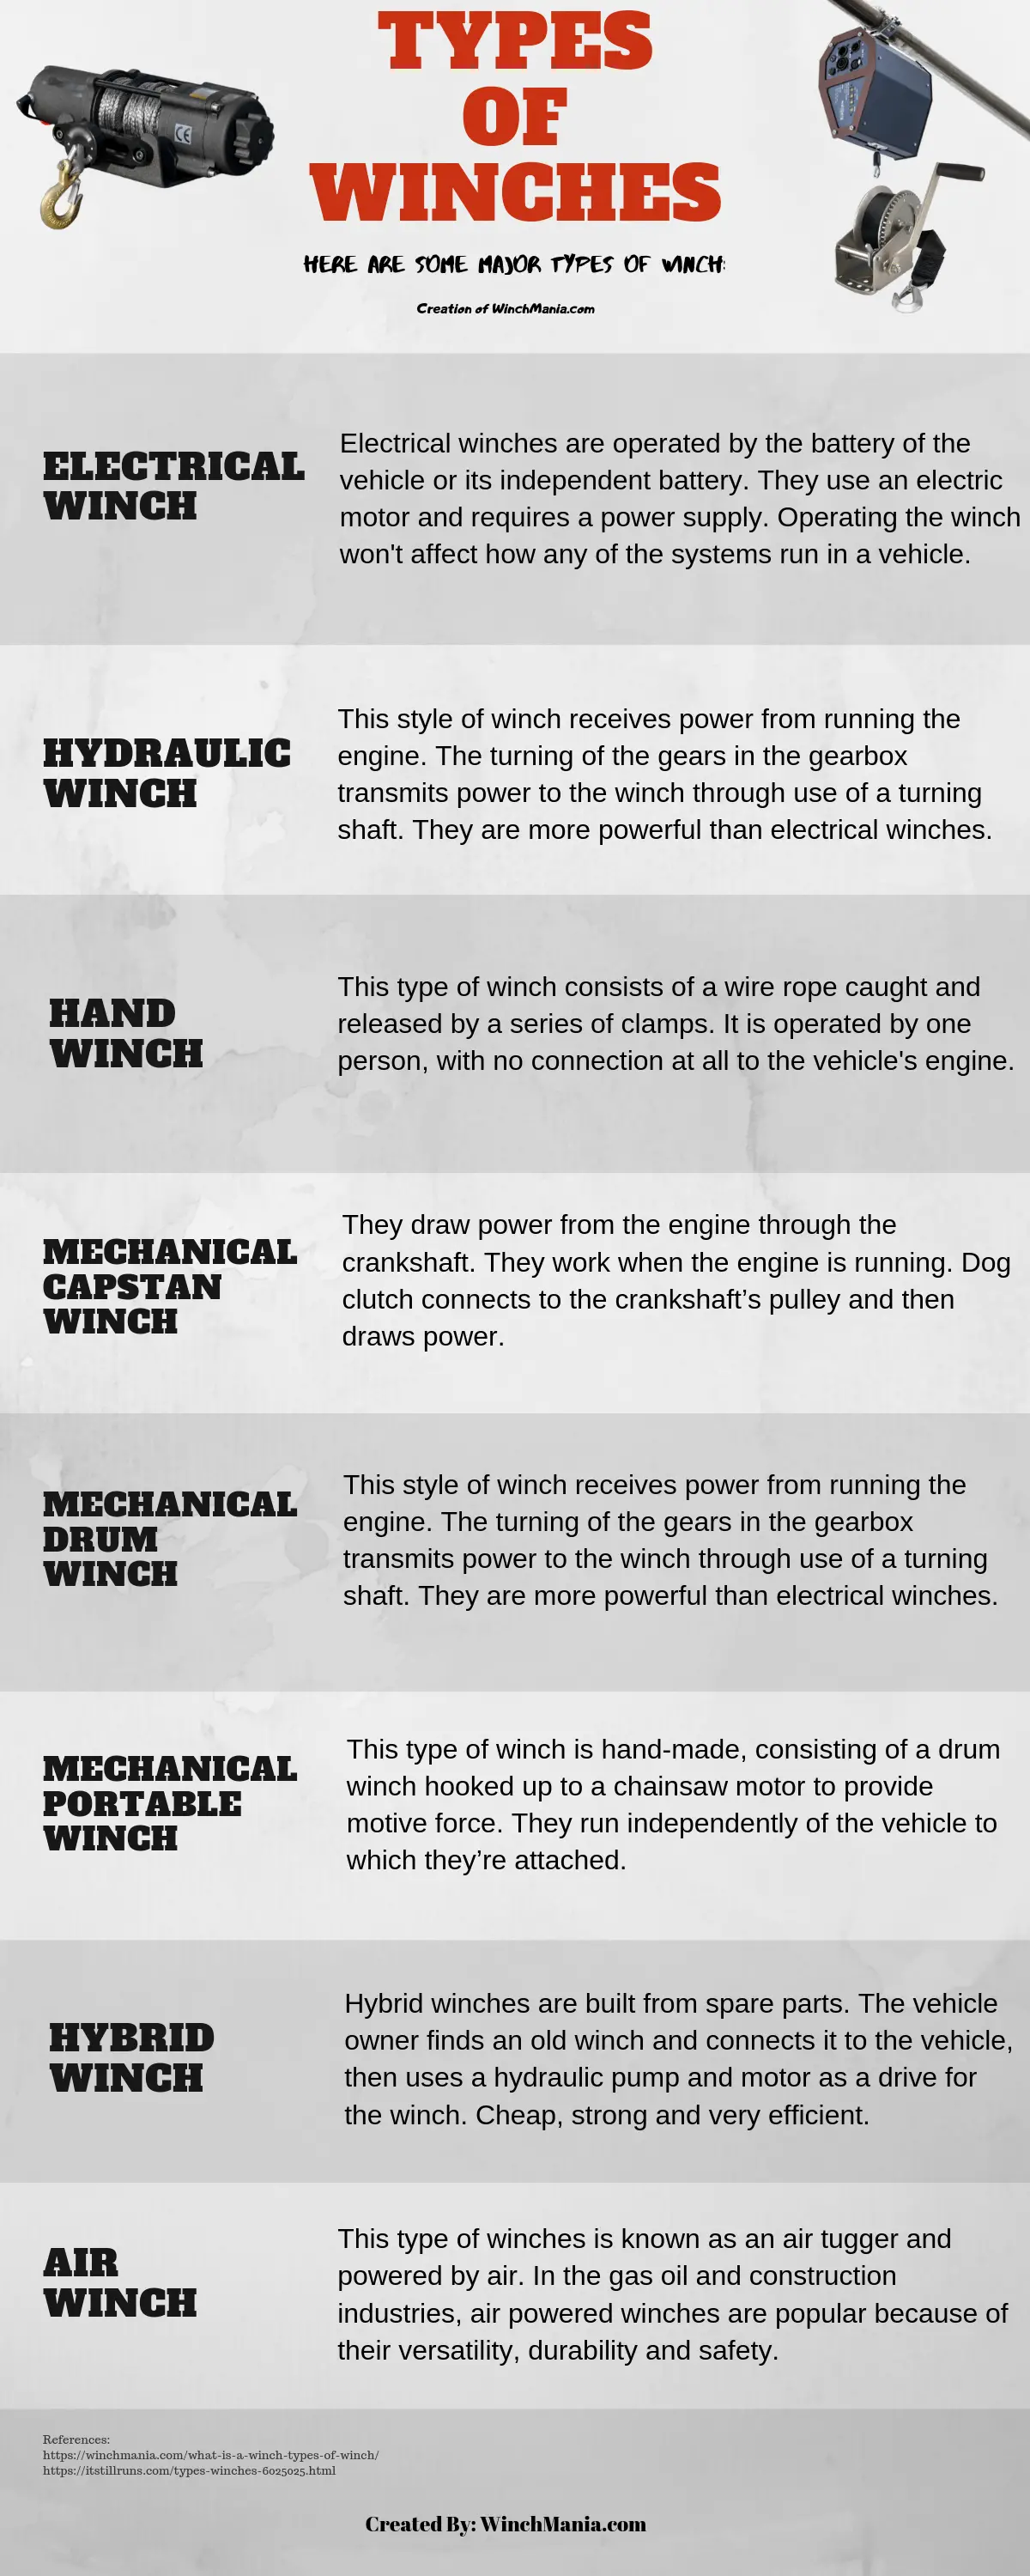 Types of winches infographic